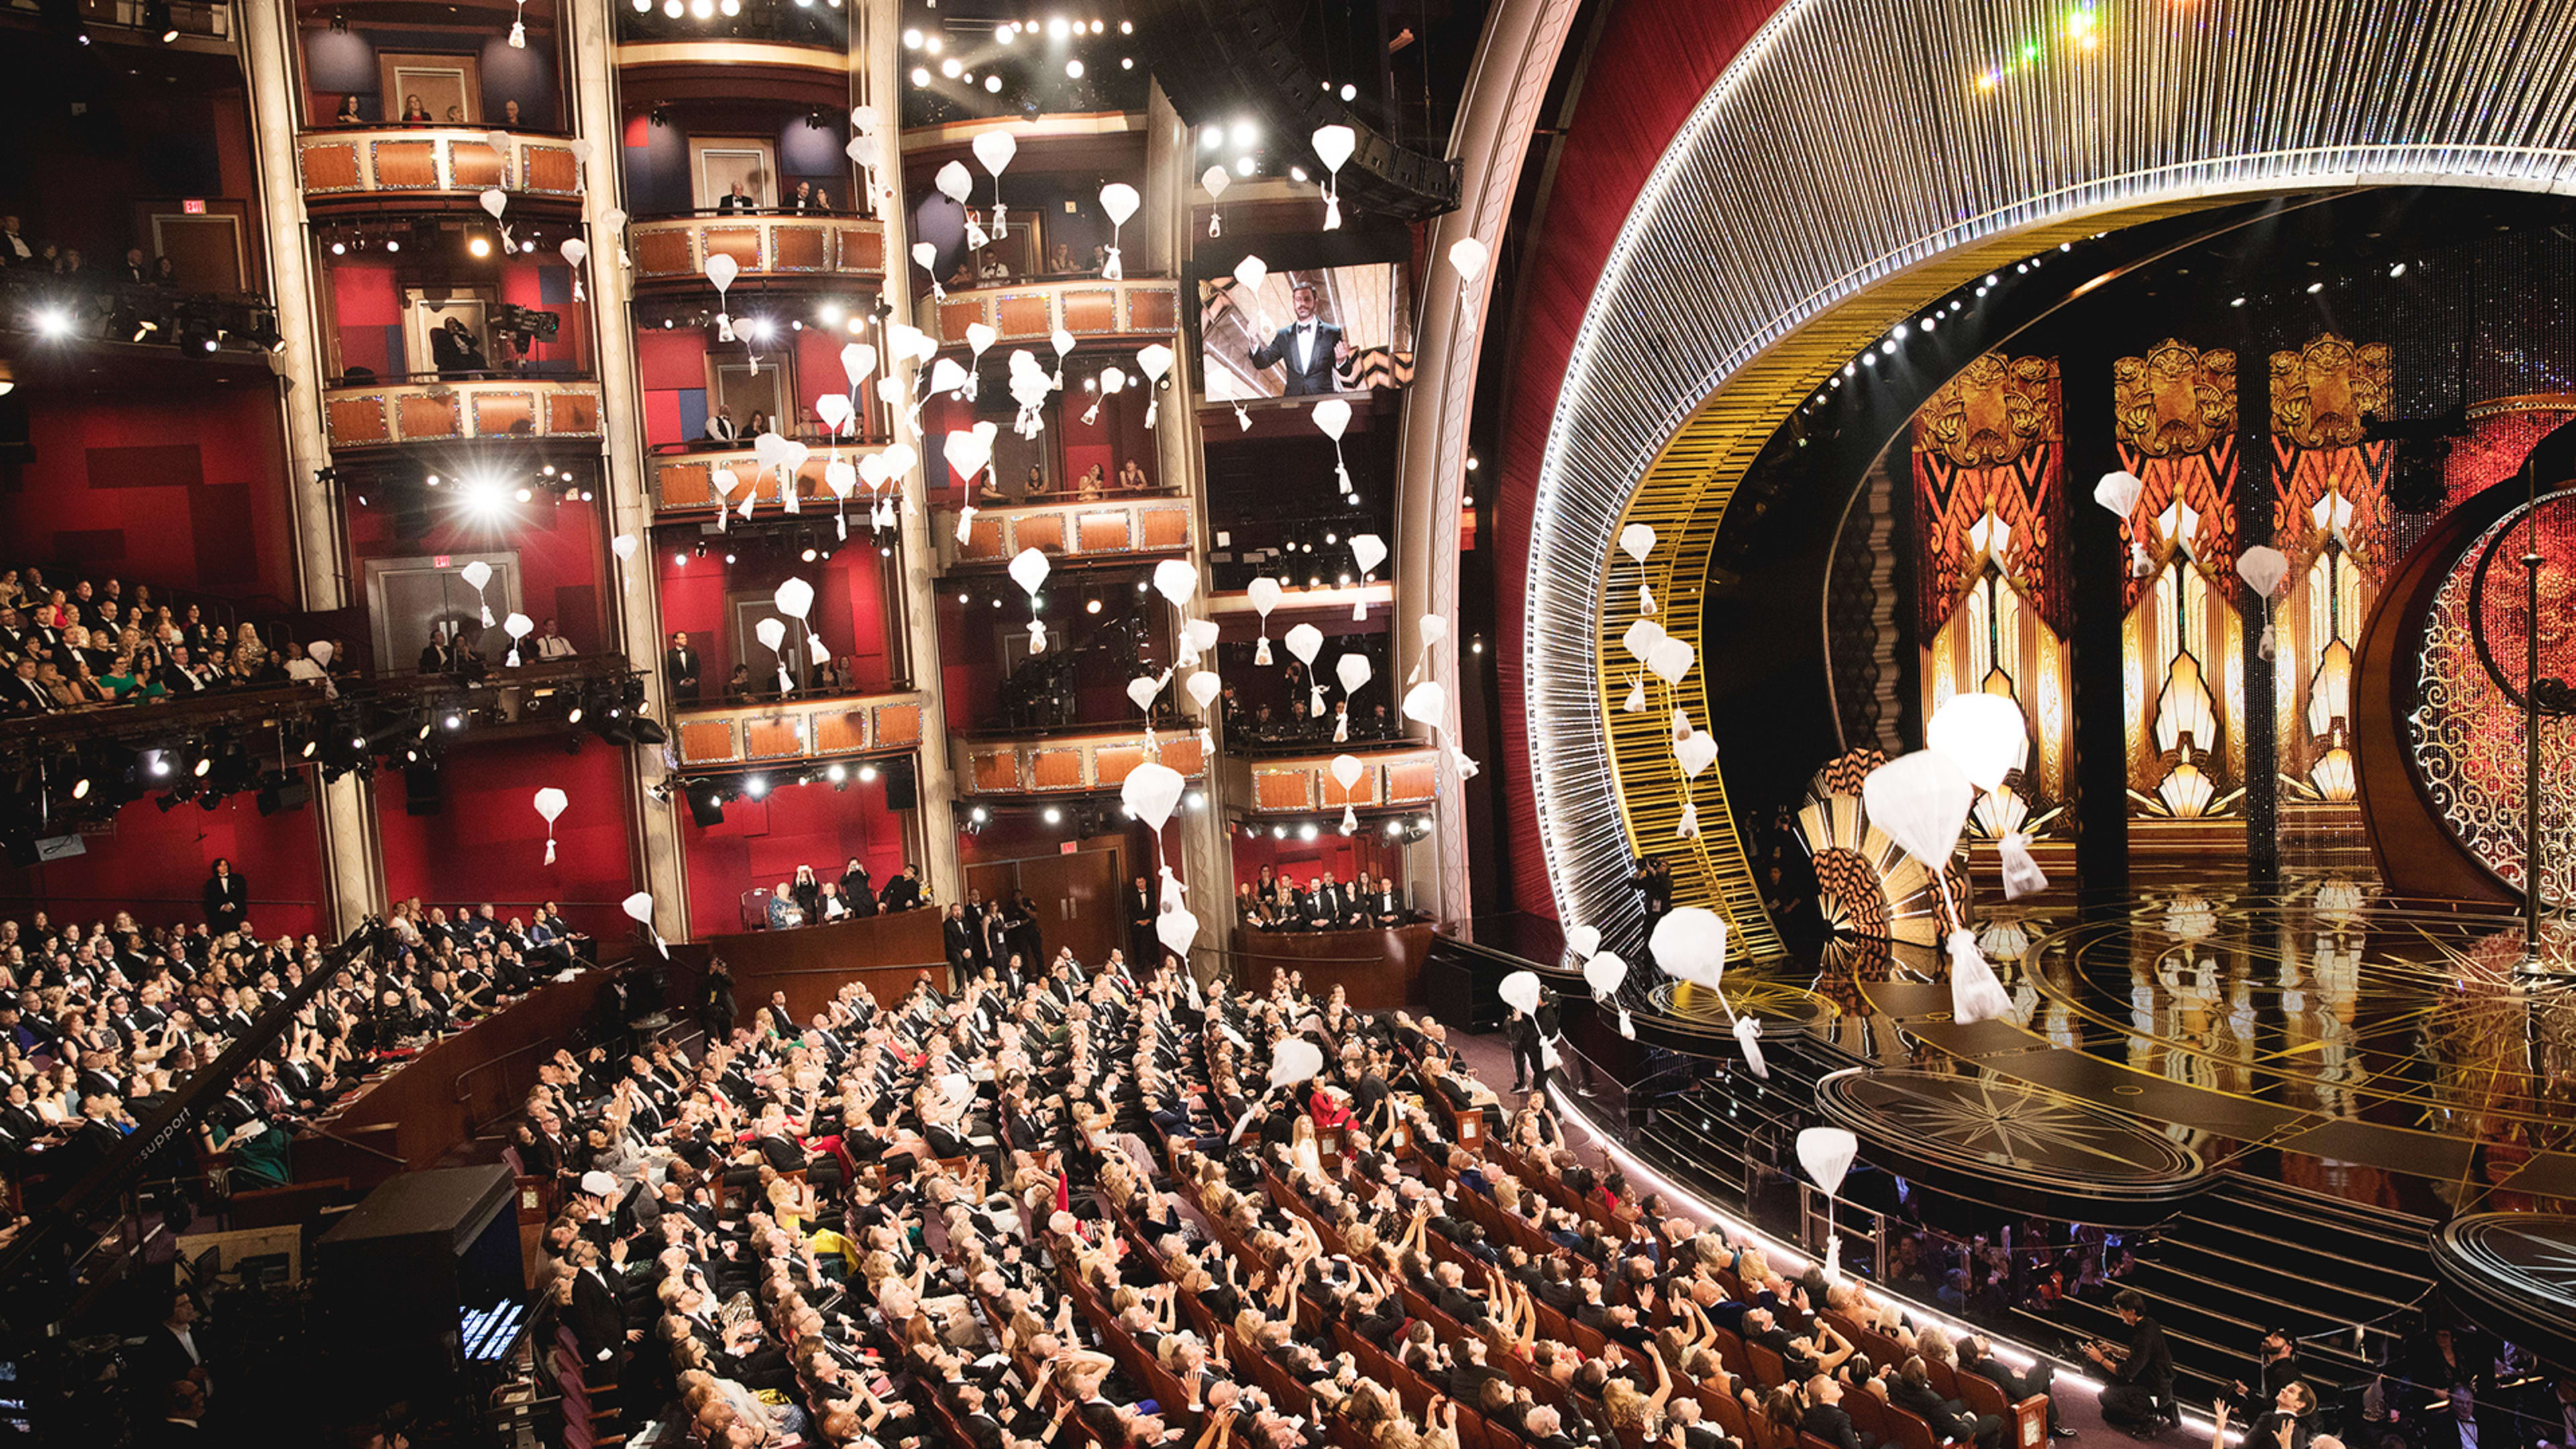 Oscars live-stream 2018: How to watch the awards and red carpet online without a TV